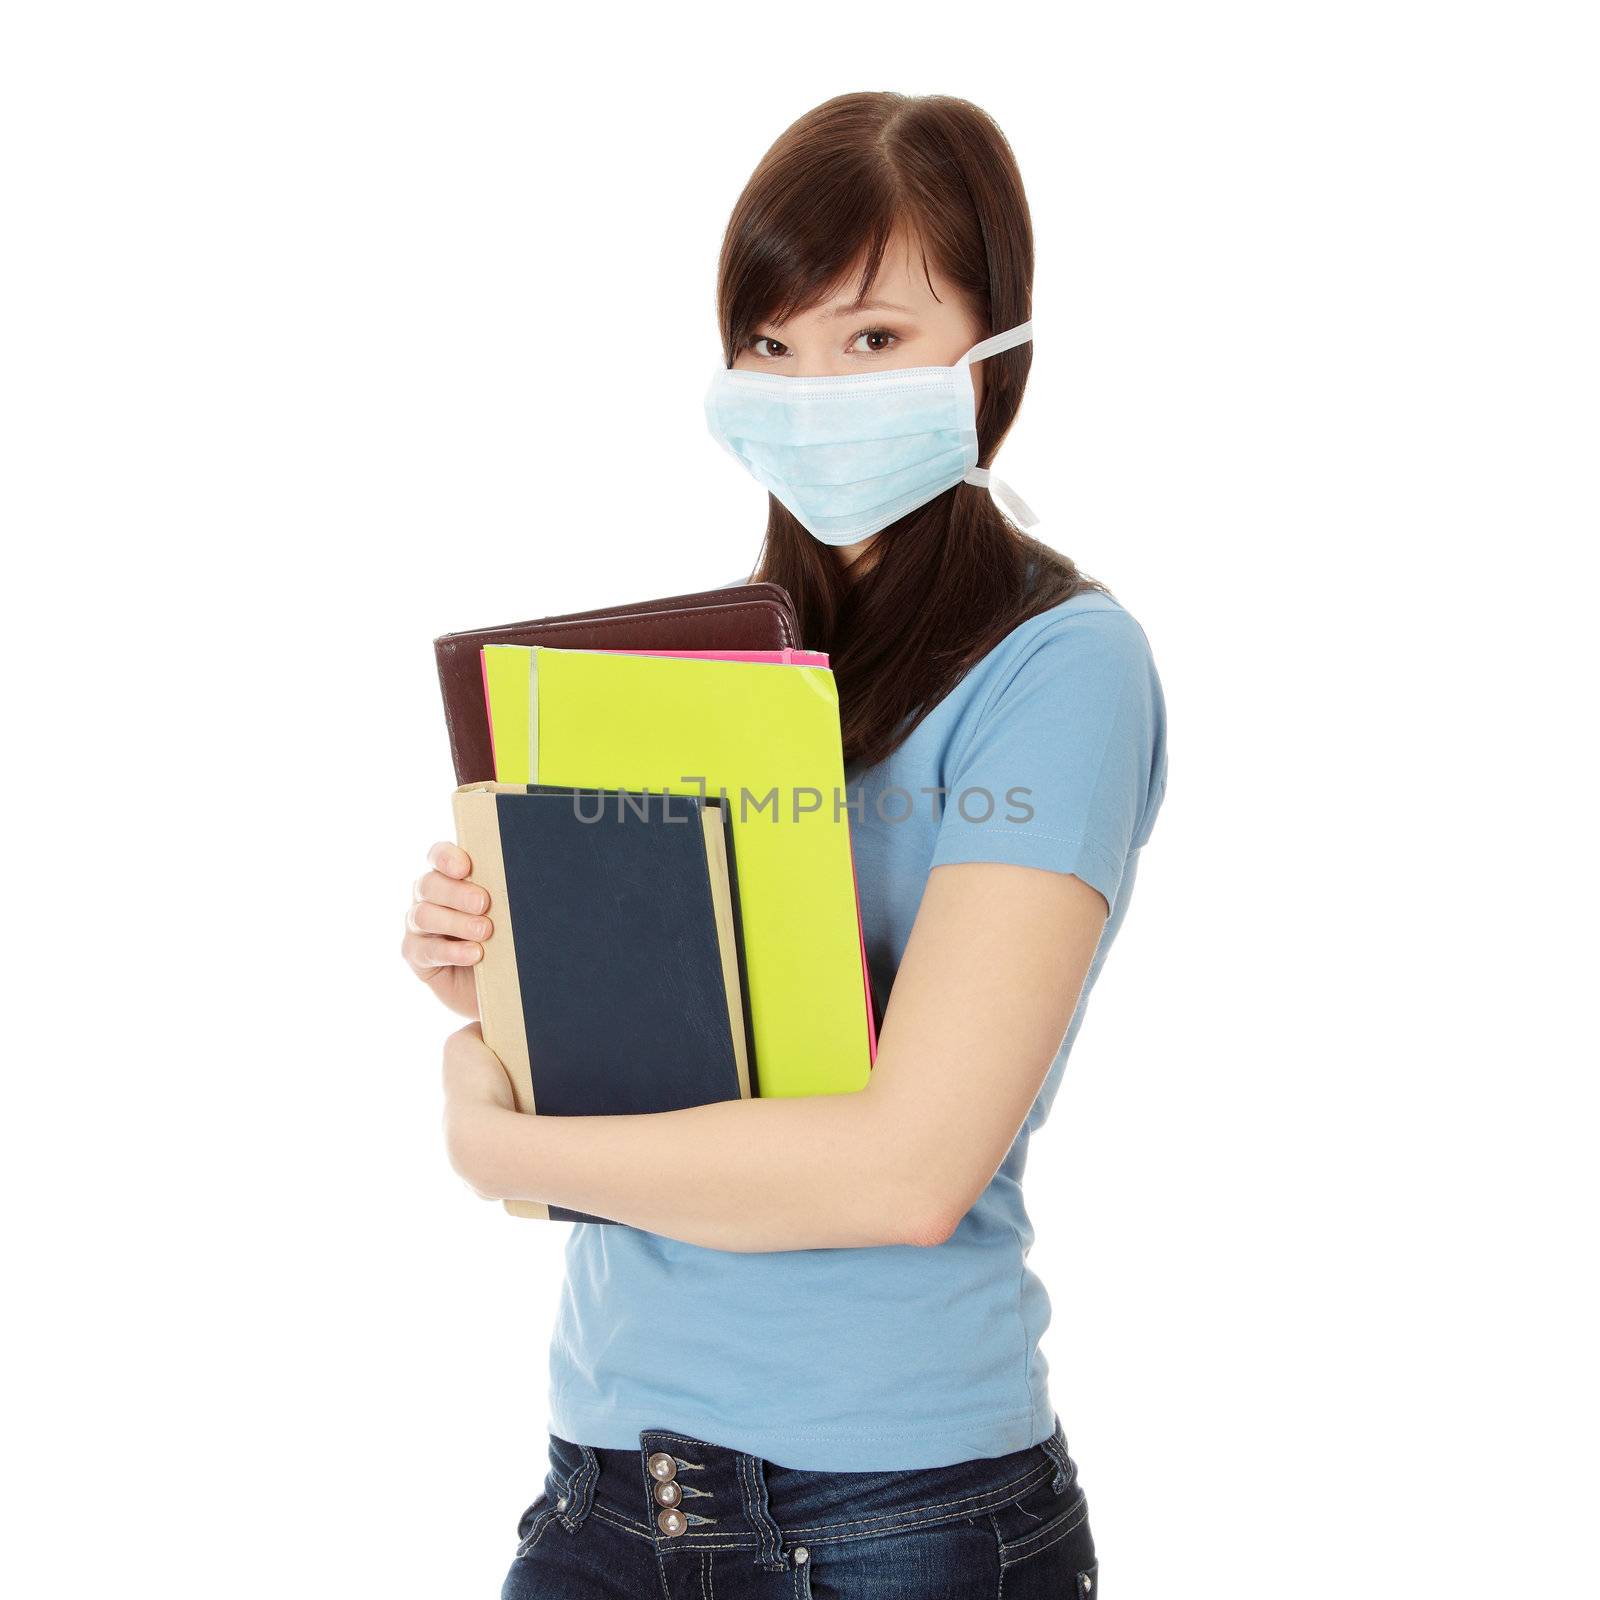 Young caucasian student woman with mask on her face. She is defending her self from viruses. Isolated on white